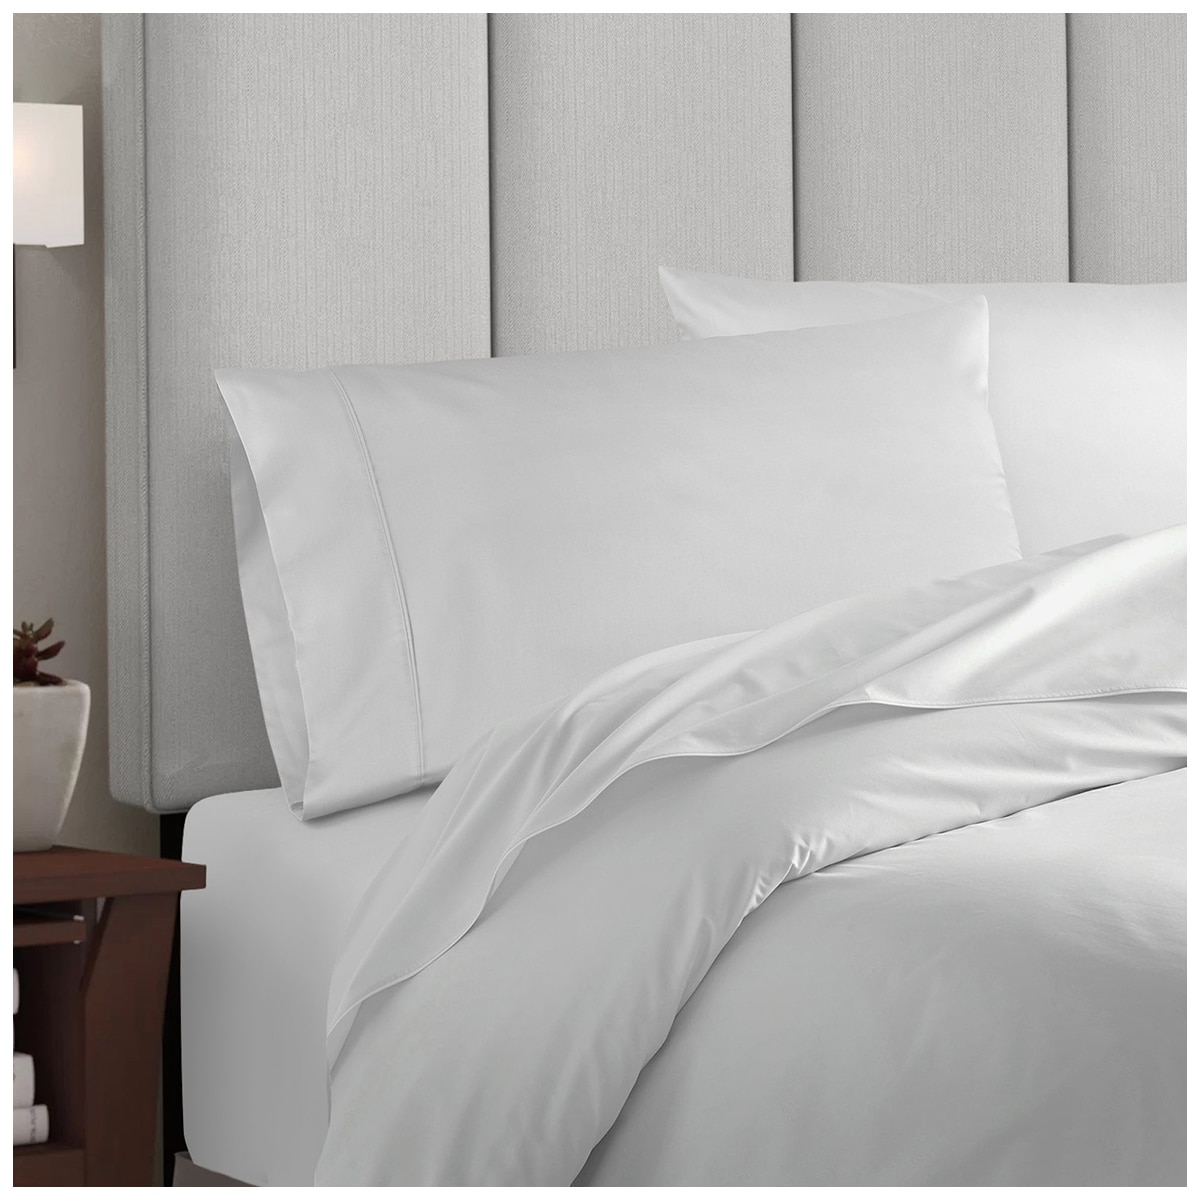 Bdirect Royal Comfort - Balmain 1000TC Bamboo cotton Quilt Cover Sets (Queen) - White